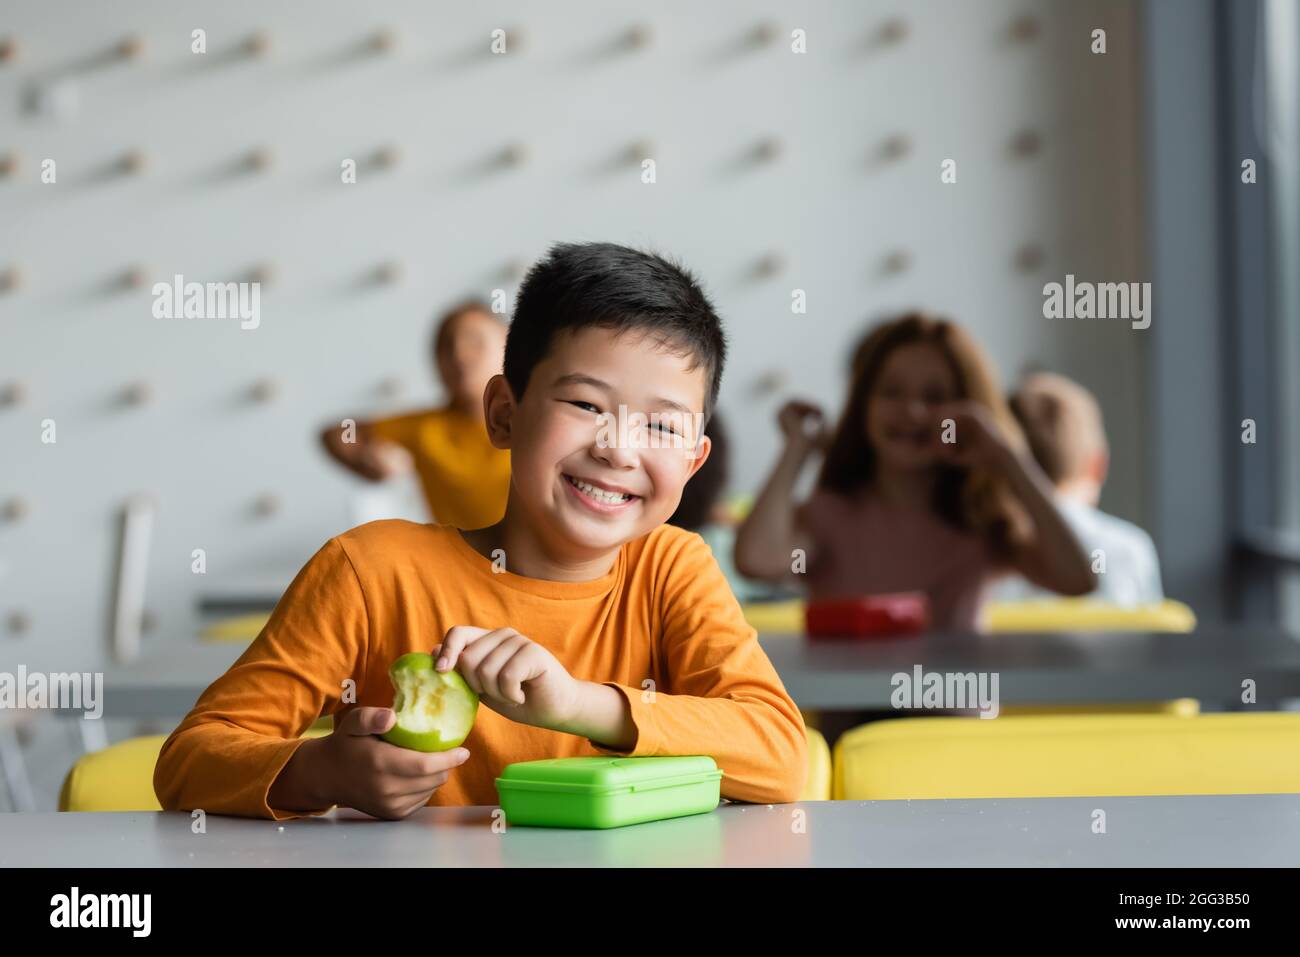 https://c8.alamy.com/comp/2GG3B50/happy-asian-kid-holding-with-fresh-apple-smiling-at-camera-near-blurred-children-in-school-canteen-2GG3B50.jpg